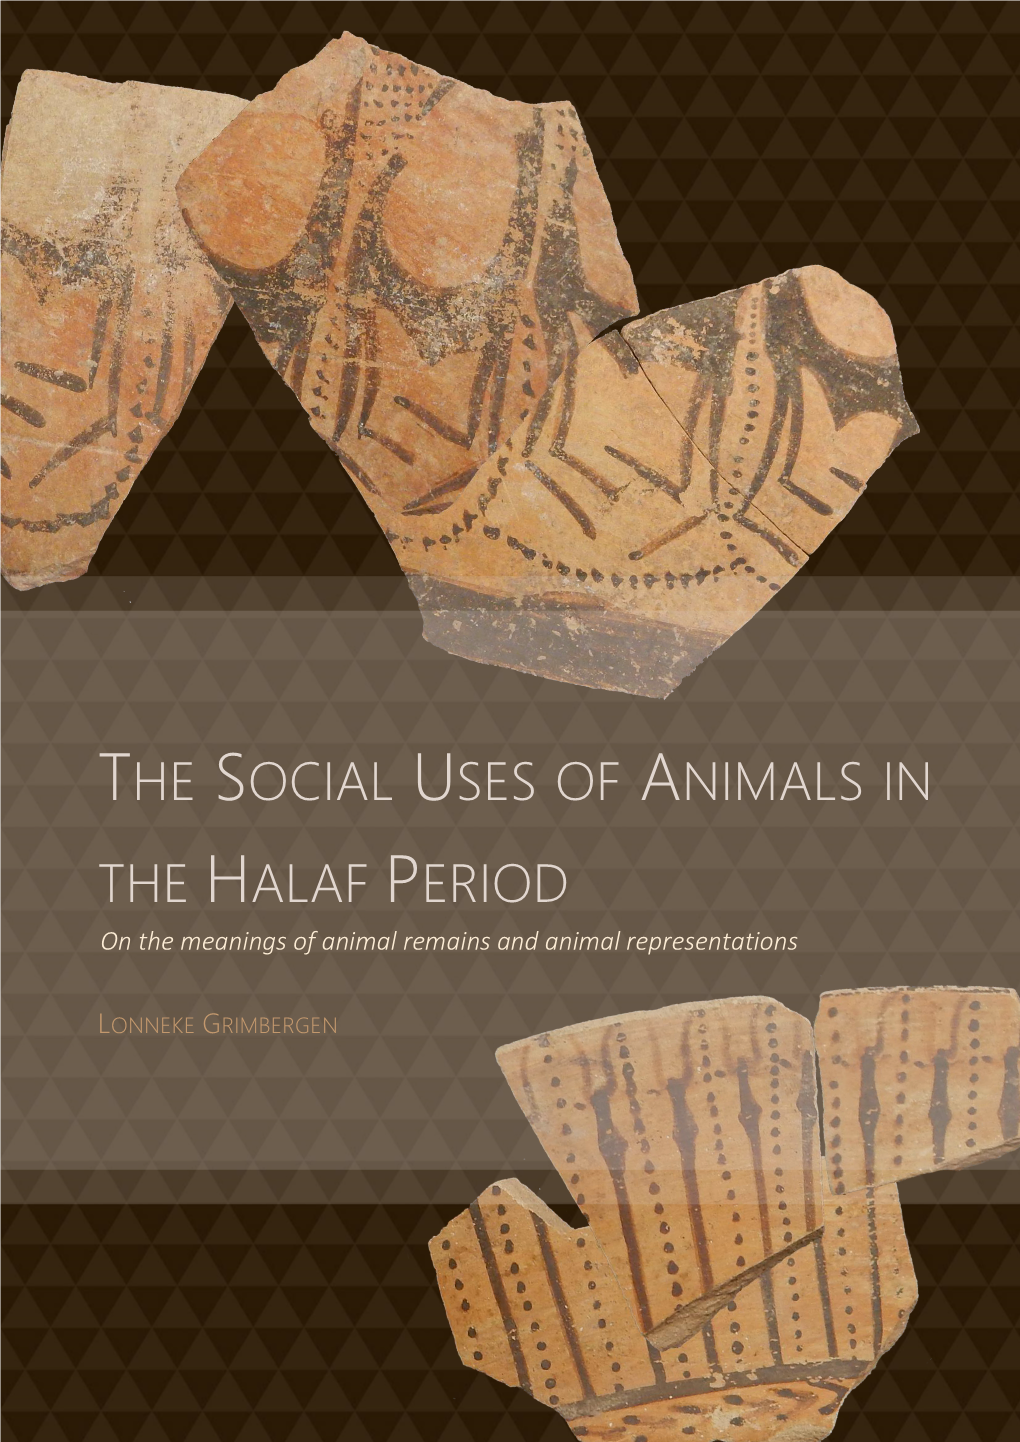 The Social Uses of Animals in the Halaf Period